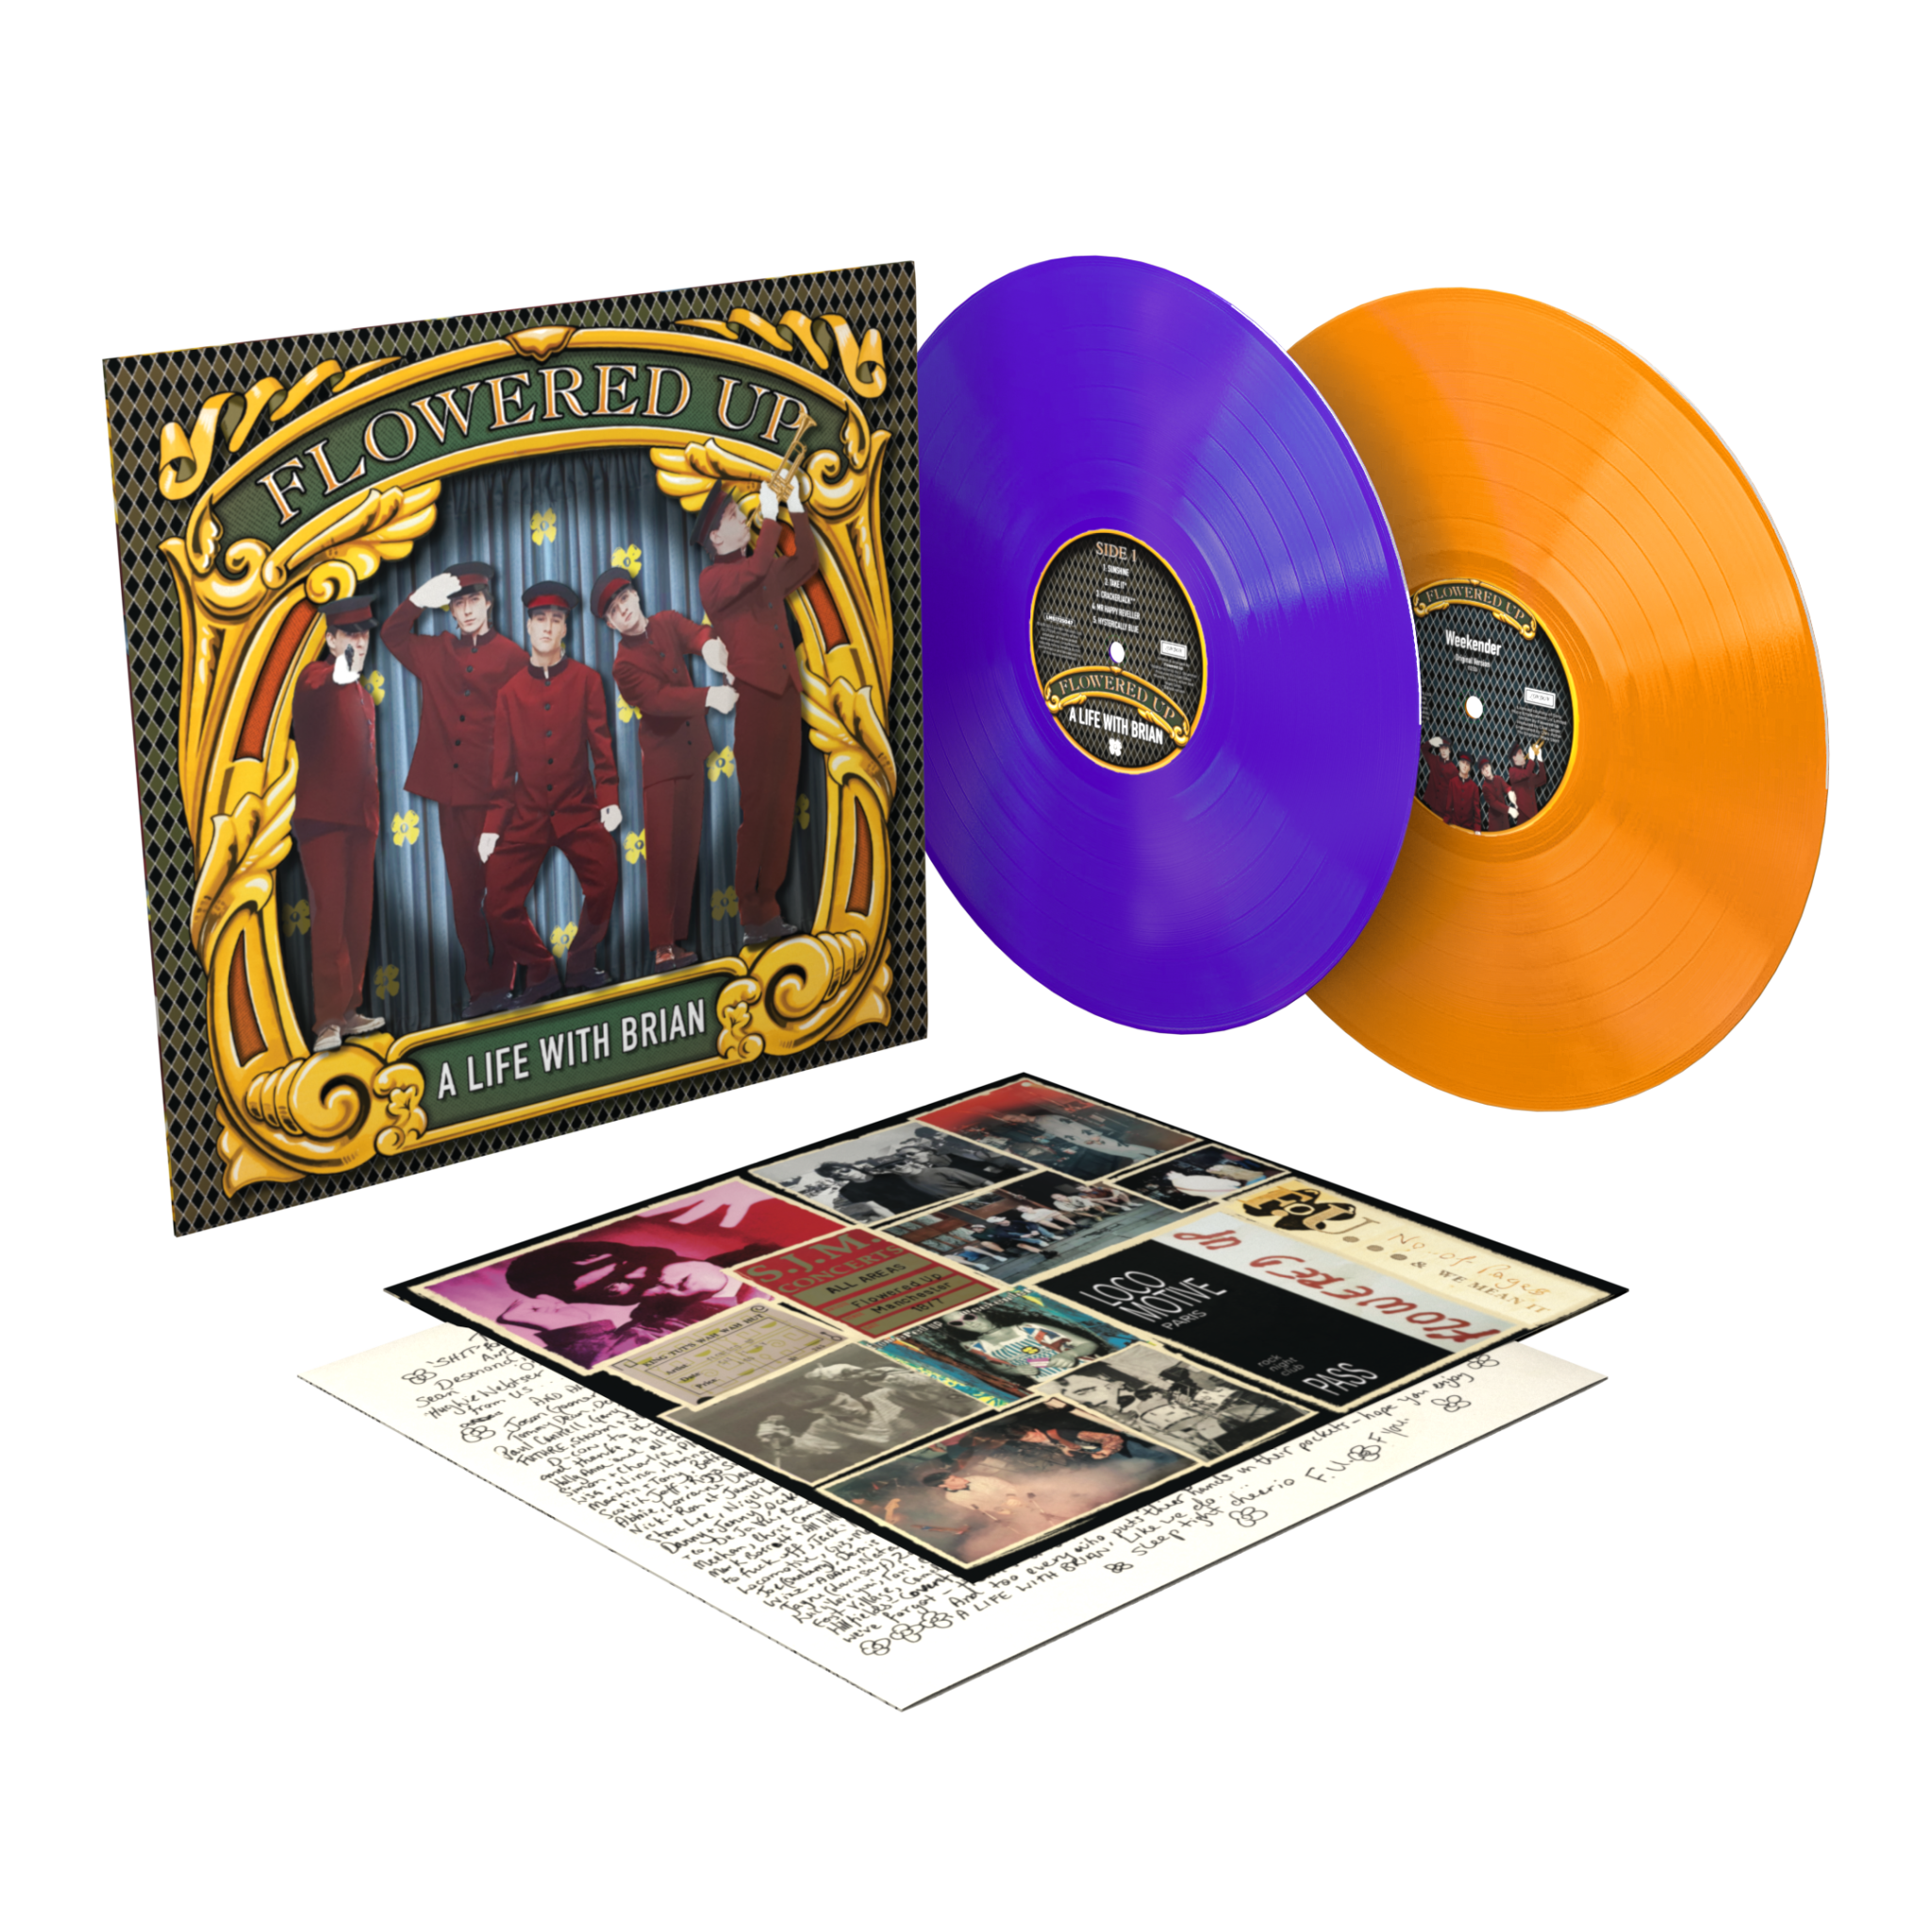 London Records Flowered Up - A Life With Brian (Orange & Purple Vinyl)